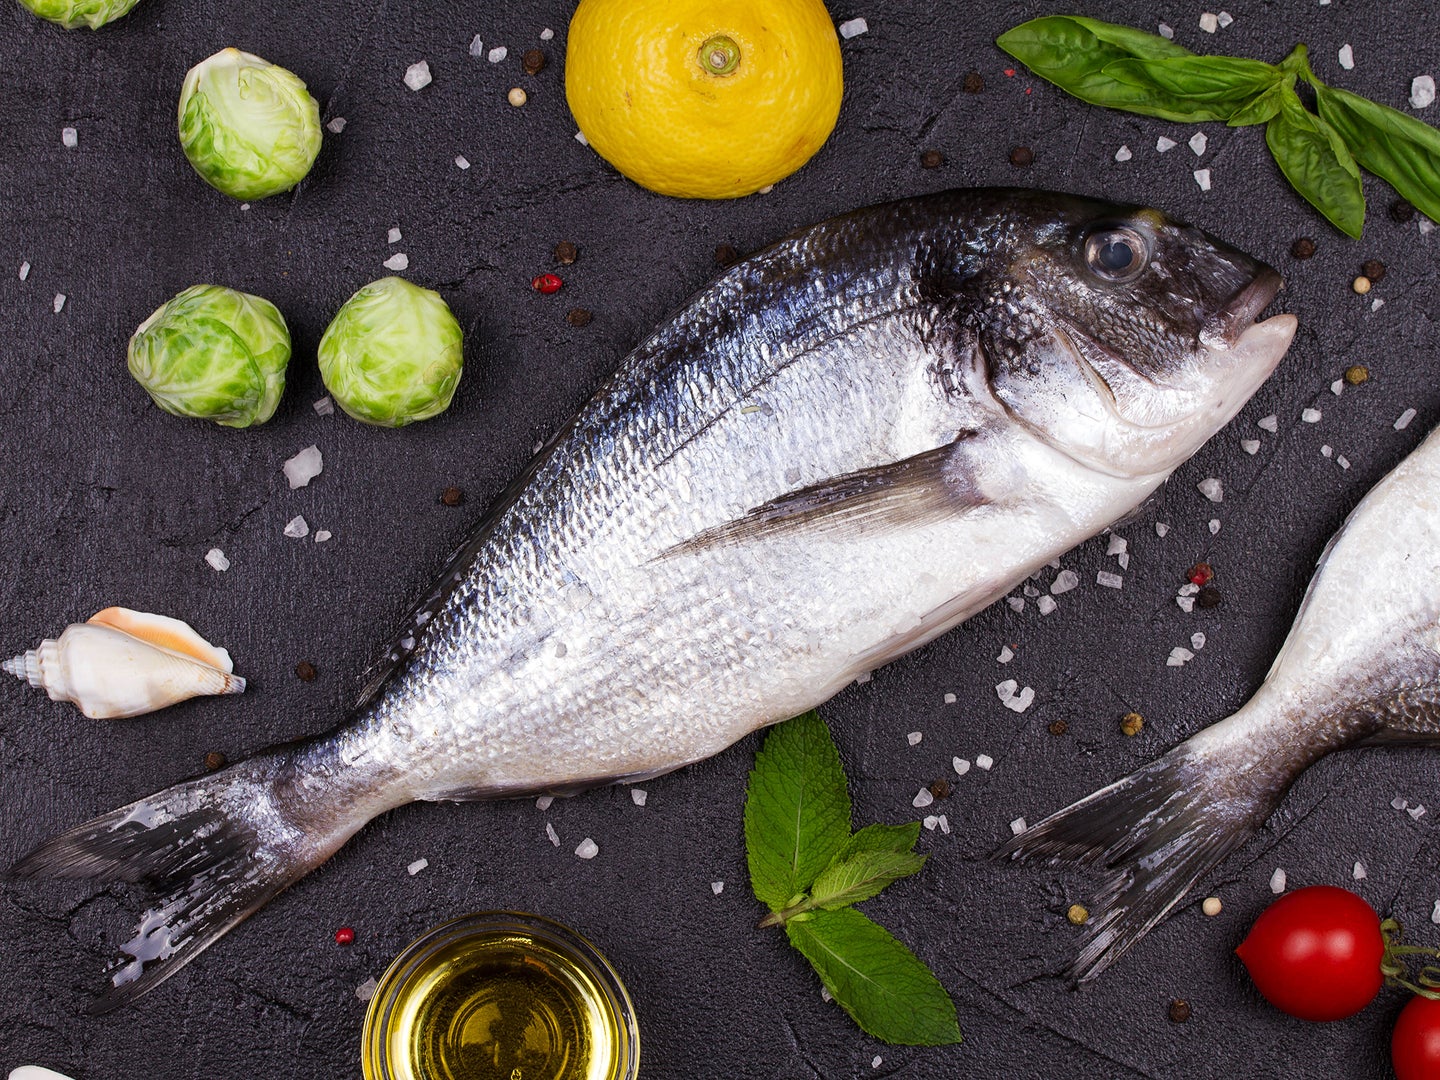 Raw fresh dorado fish with fruits and vegetables to illustrate an article about cleaning fish.